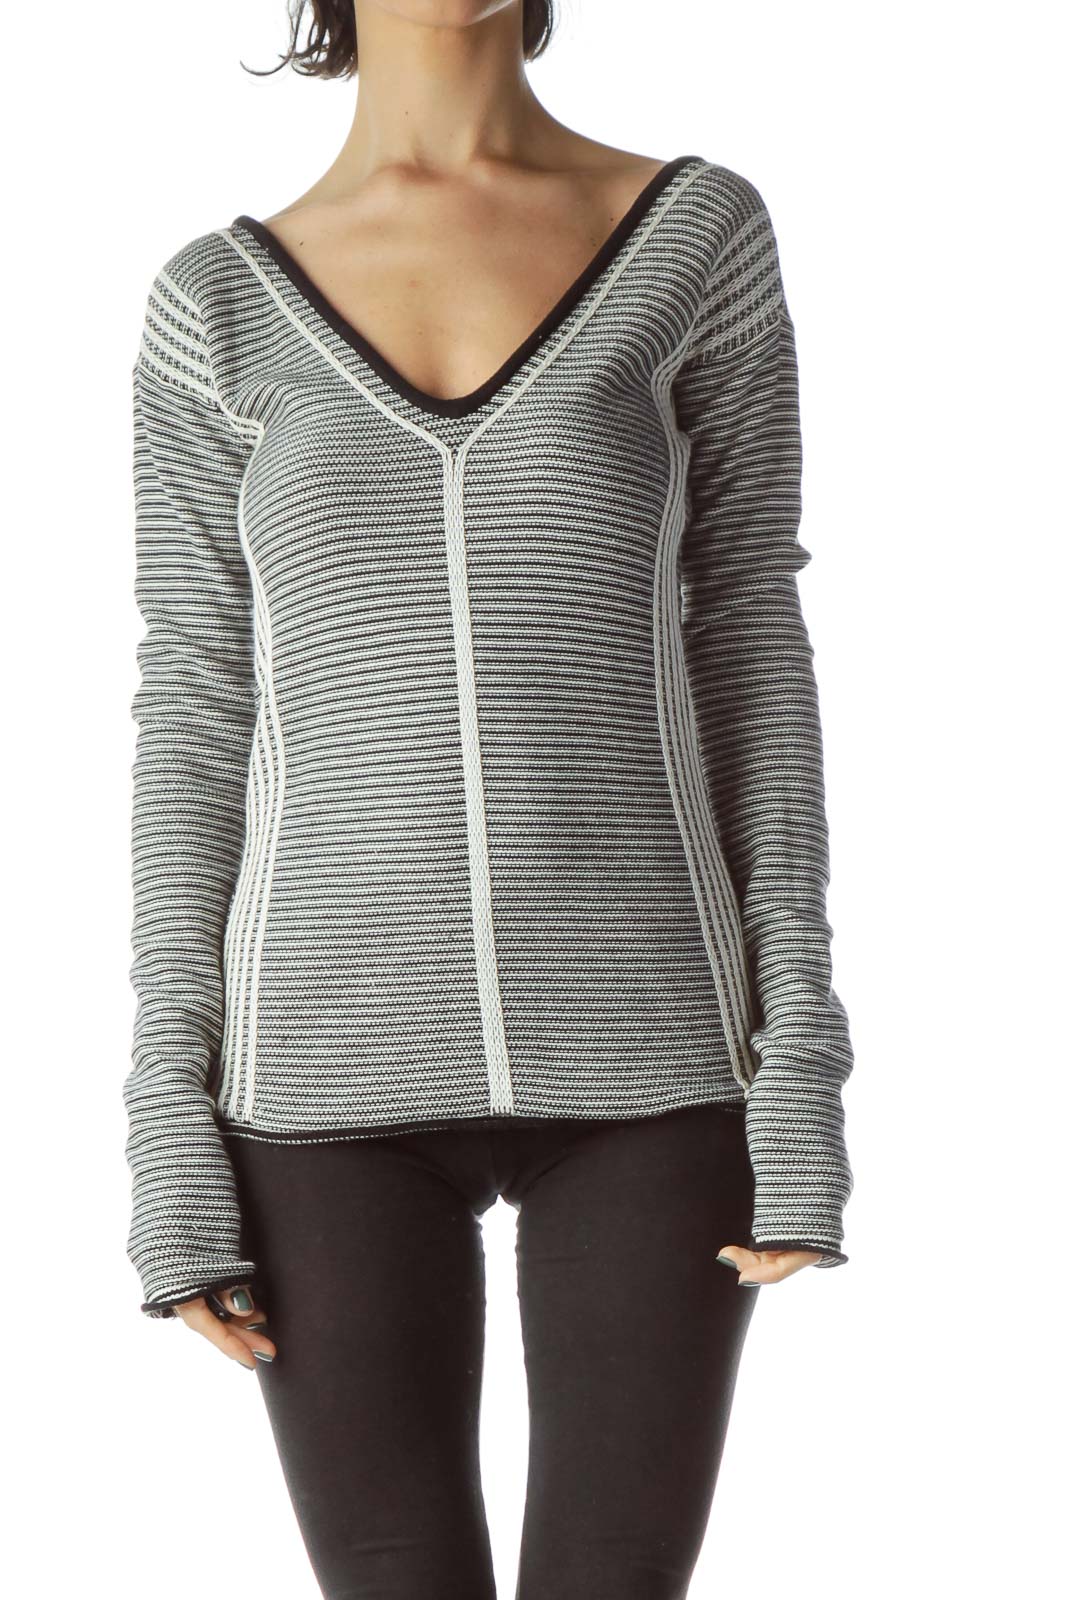 Black Cream Striped Textured Open Neck Knit Top Front